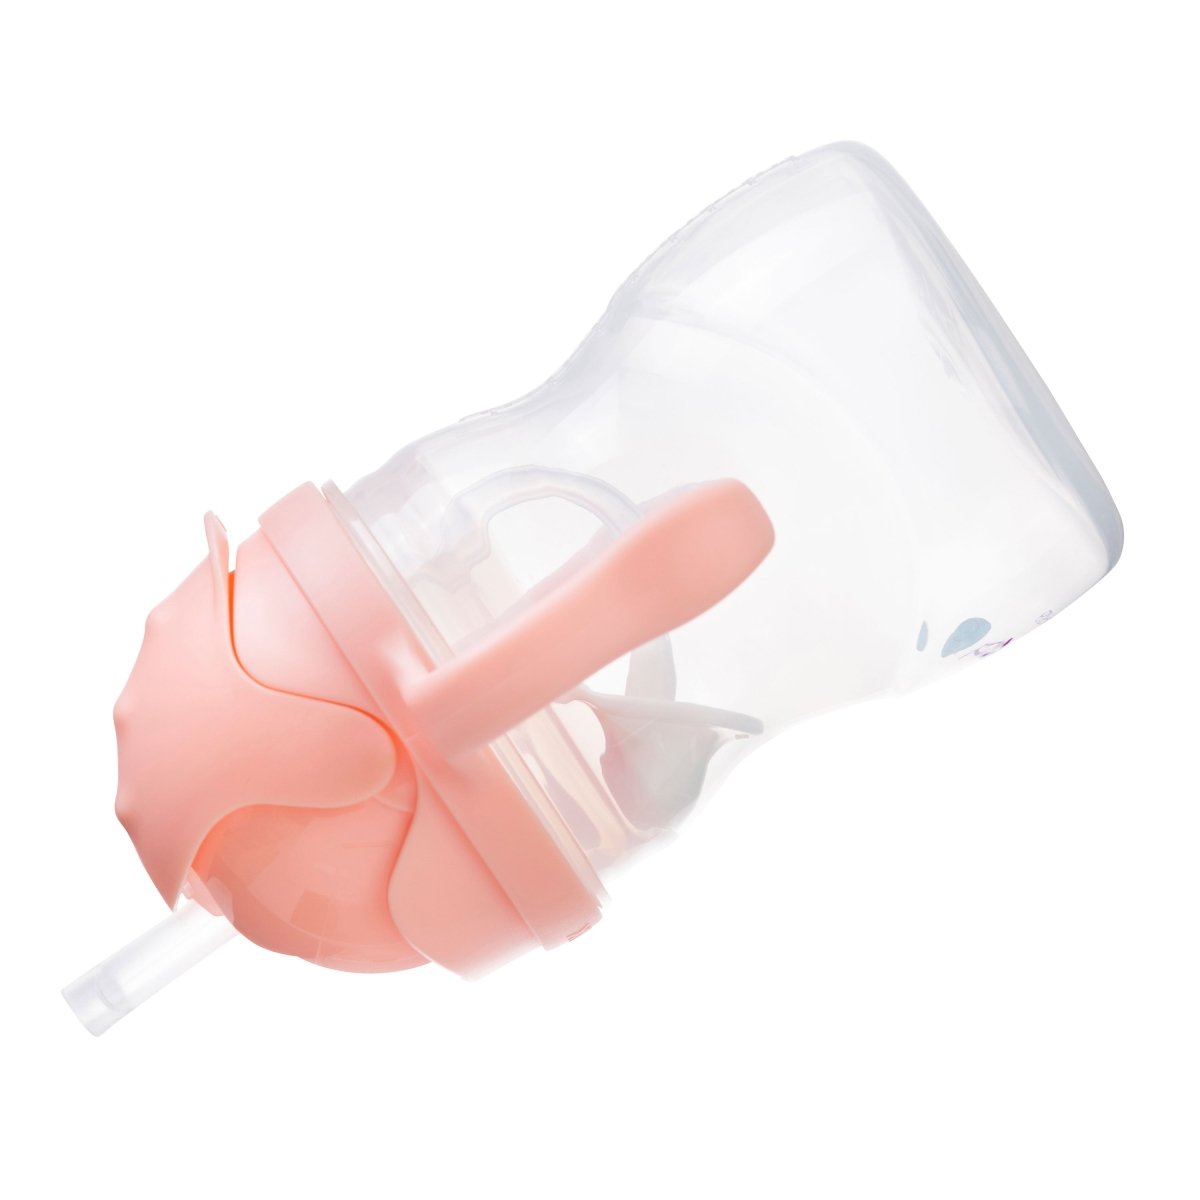 B.Box Weighted Straw Sippy Cup- Tutti Fruiti Light Pink - 521